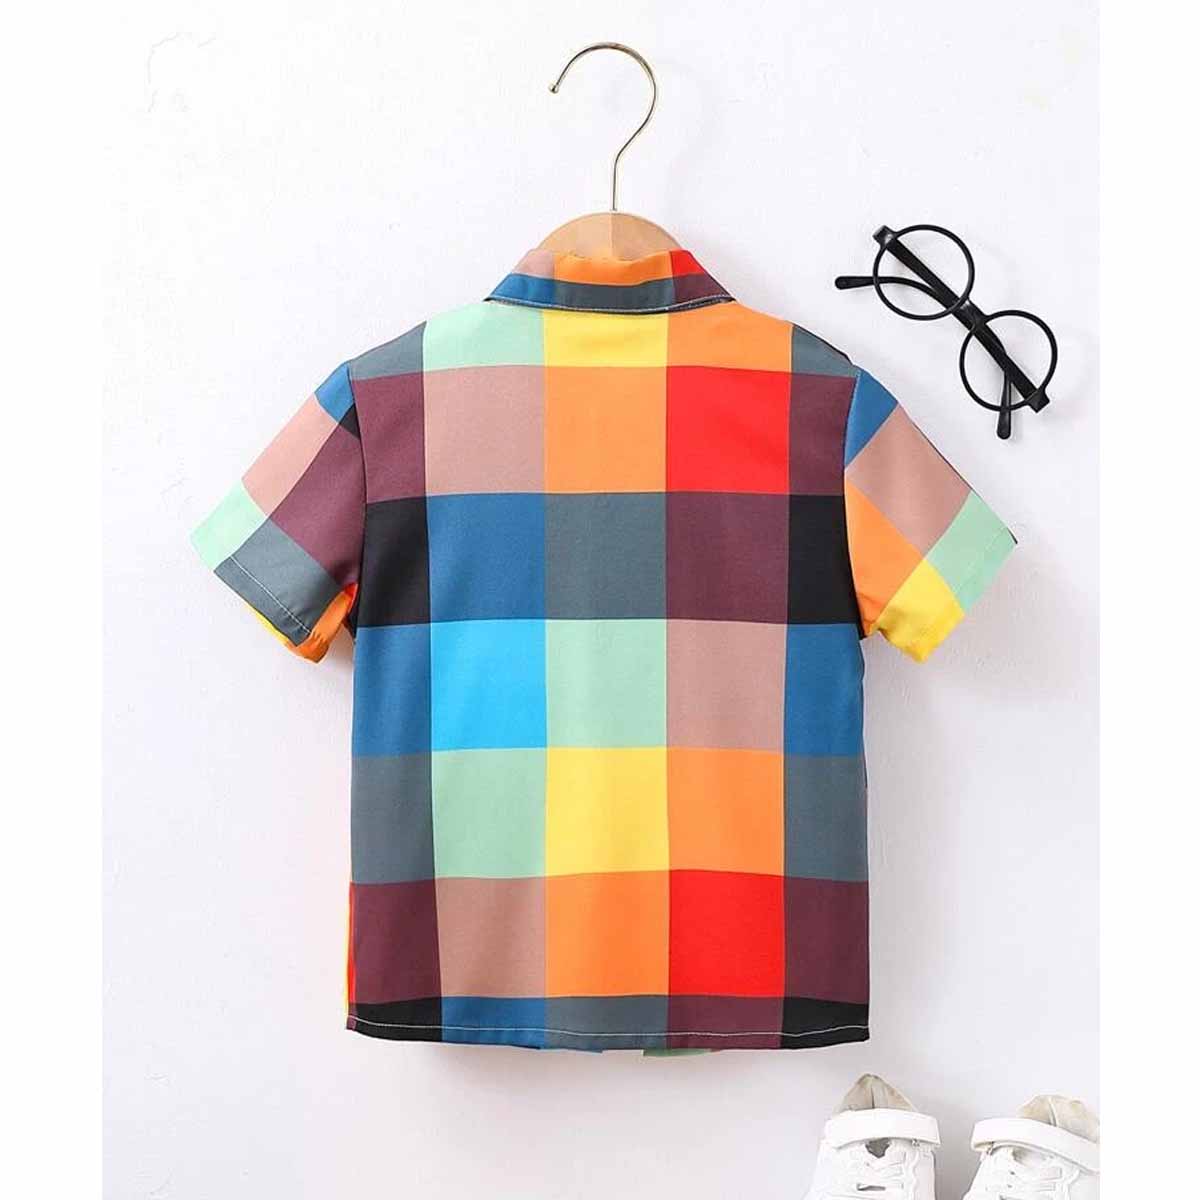 Venutaloza Boys Daisy And Striped & Plaid Patched Pocket Designer Button Front Shirt For Boy.